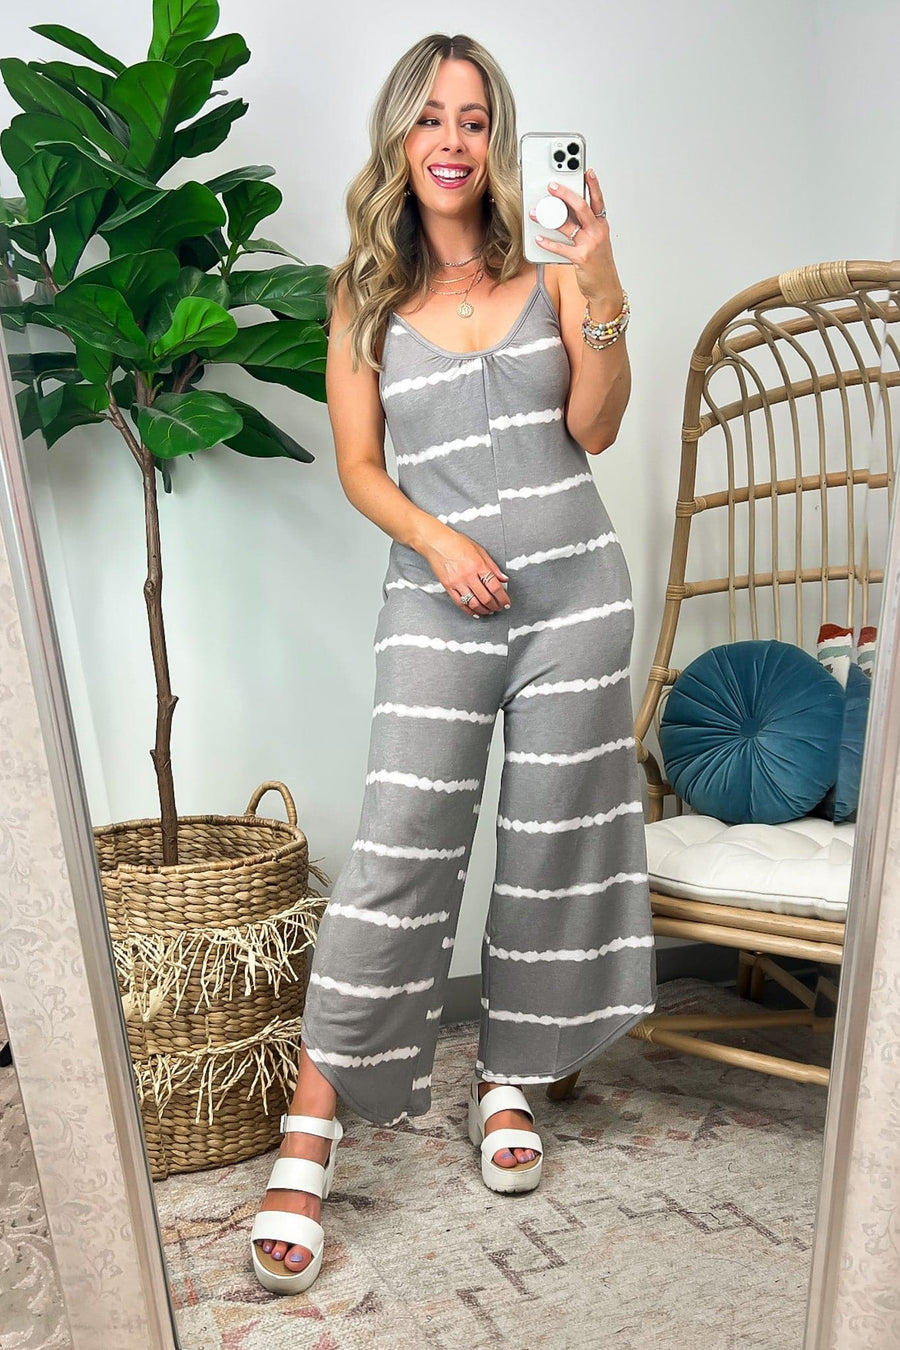  Rowenah Sleeveless Striped Romper Jumpsuit - FINAL SALE - Madison and Mallory